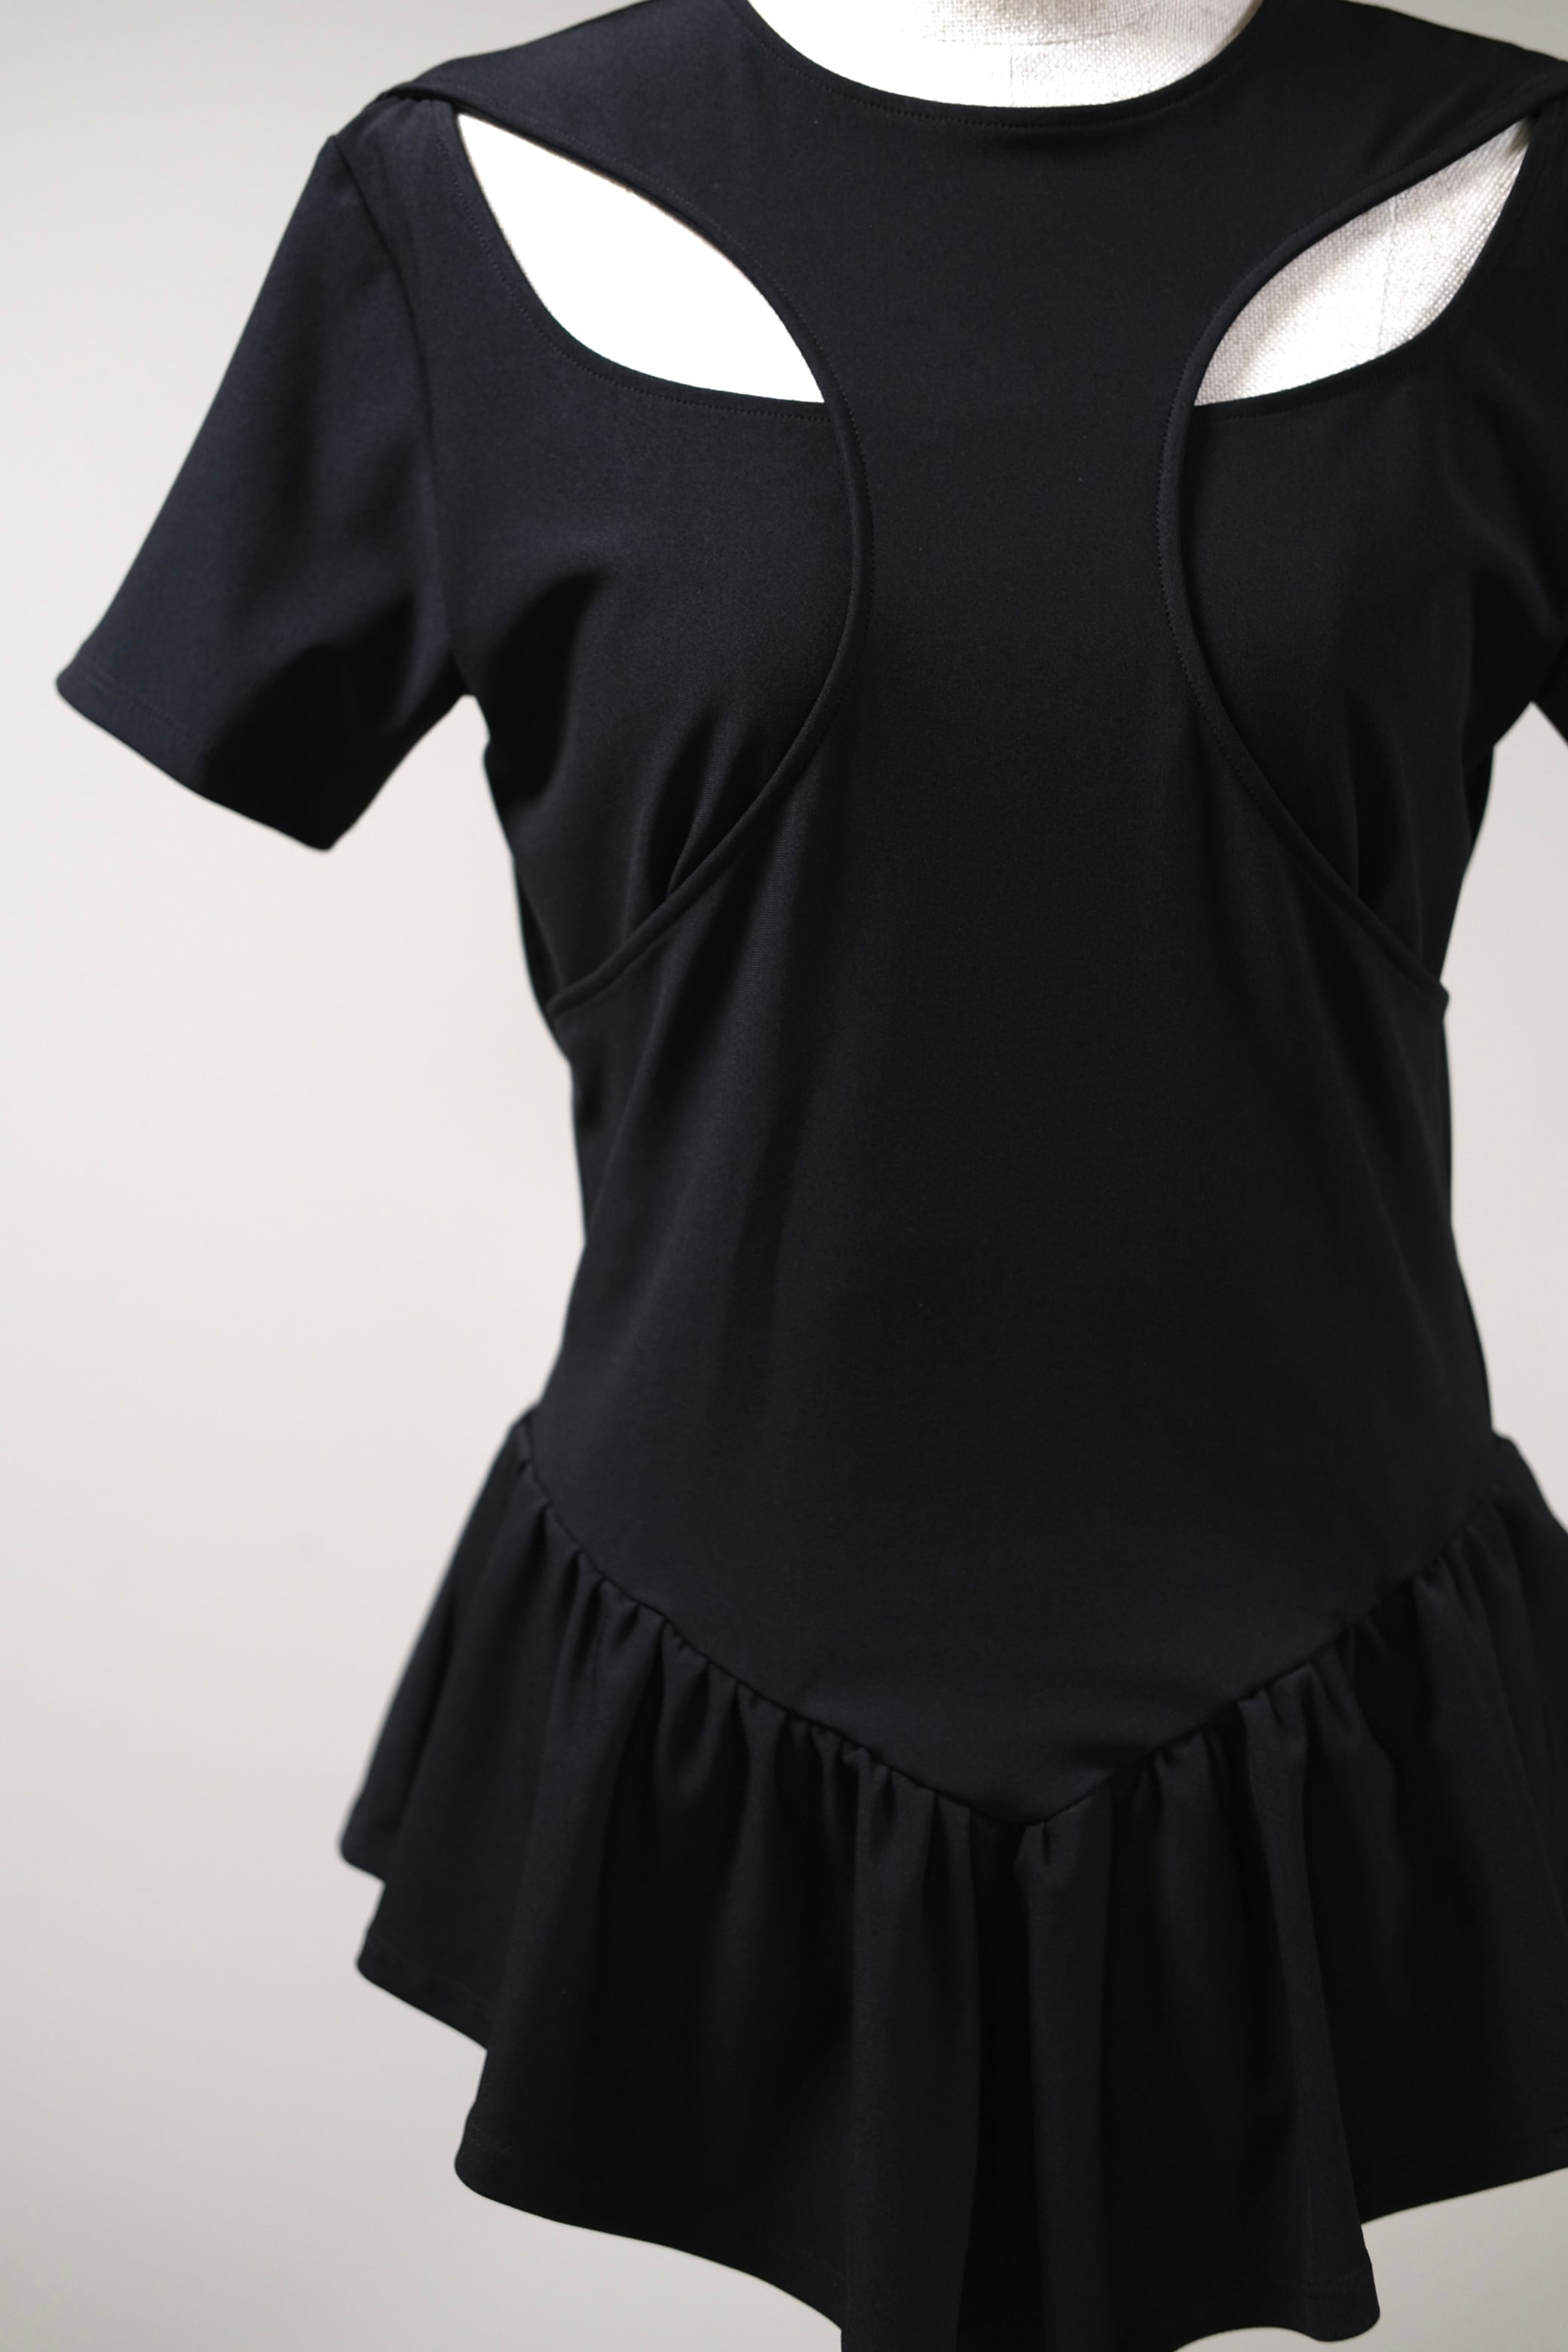 【FETICO】LAYERED JERSEY TOP - black | loop powered by BASE